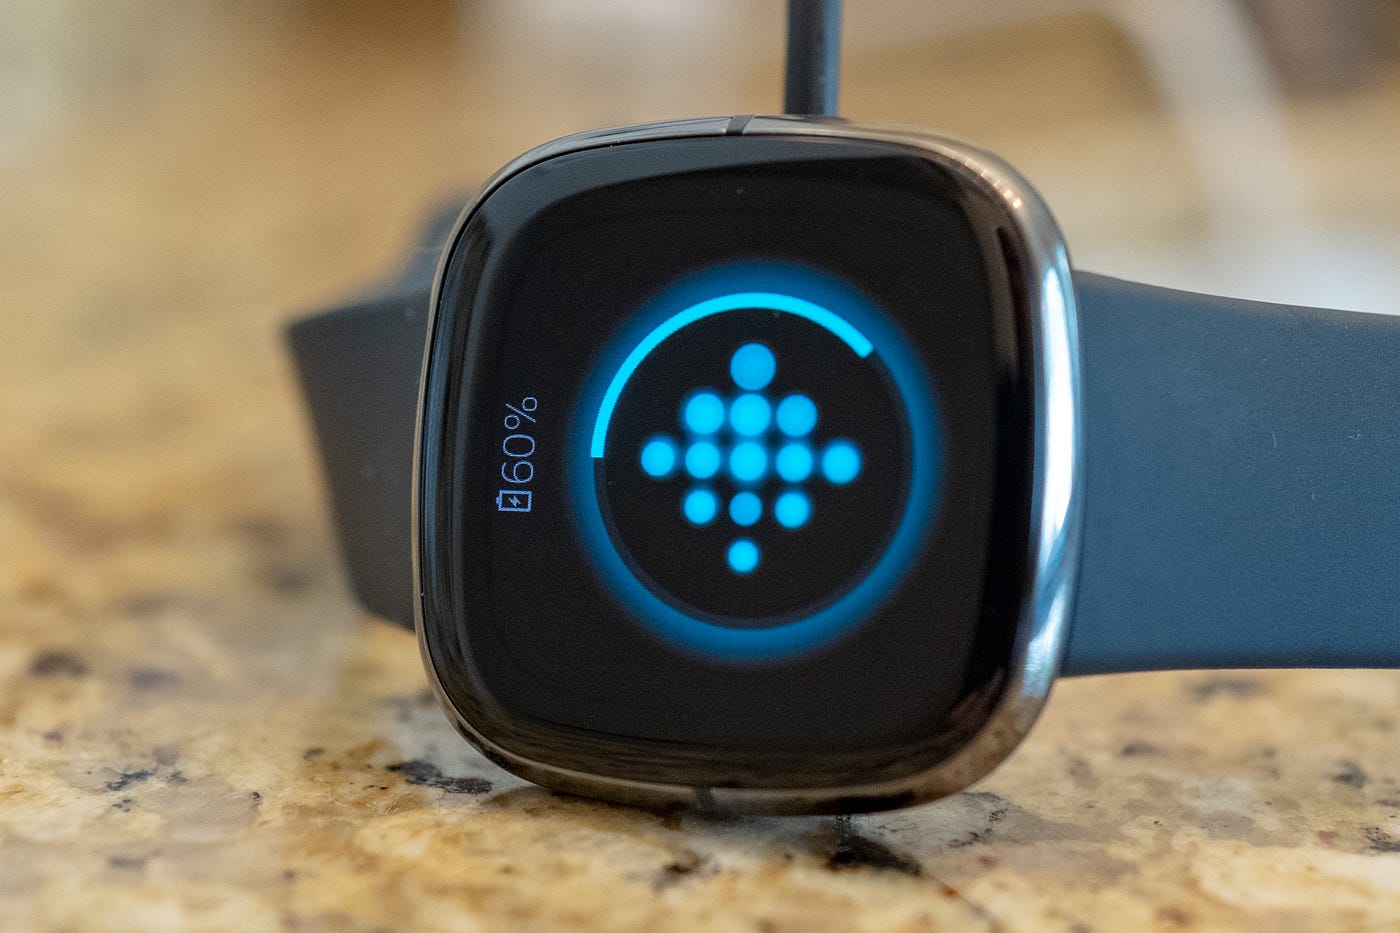 Smart Chef Scale Apple Watch Integration for speedy food tracking